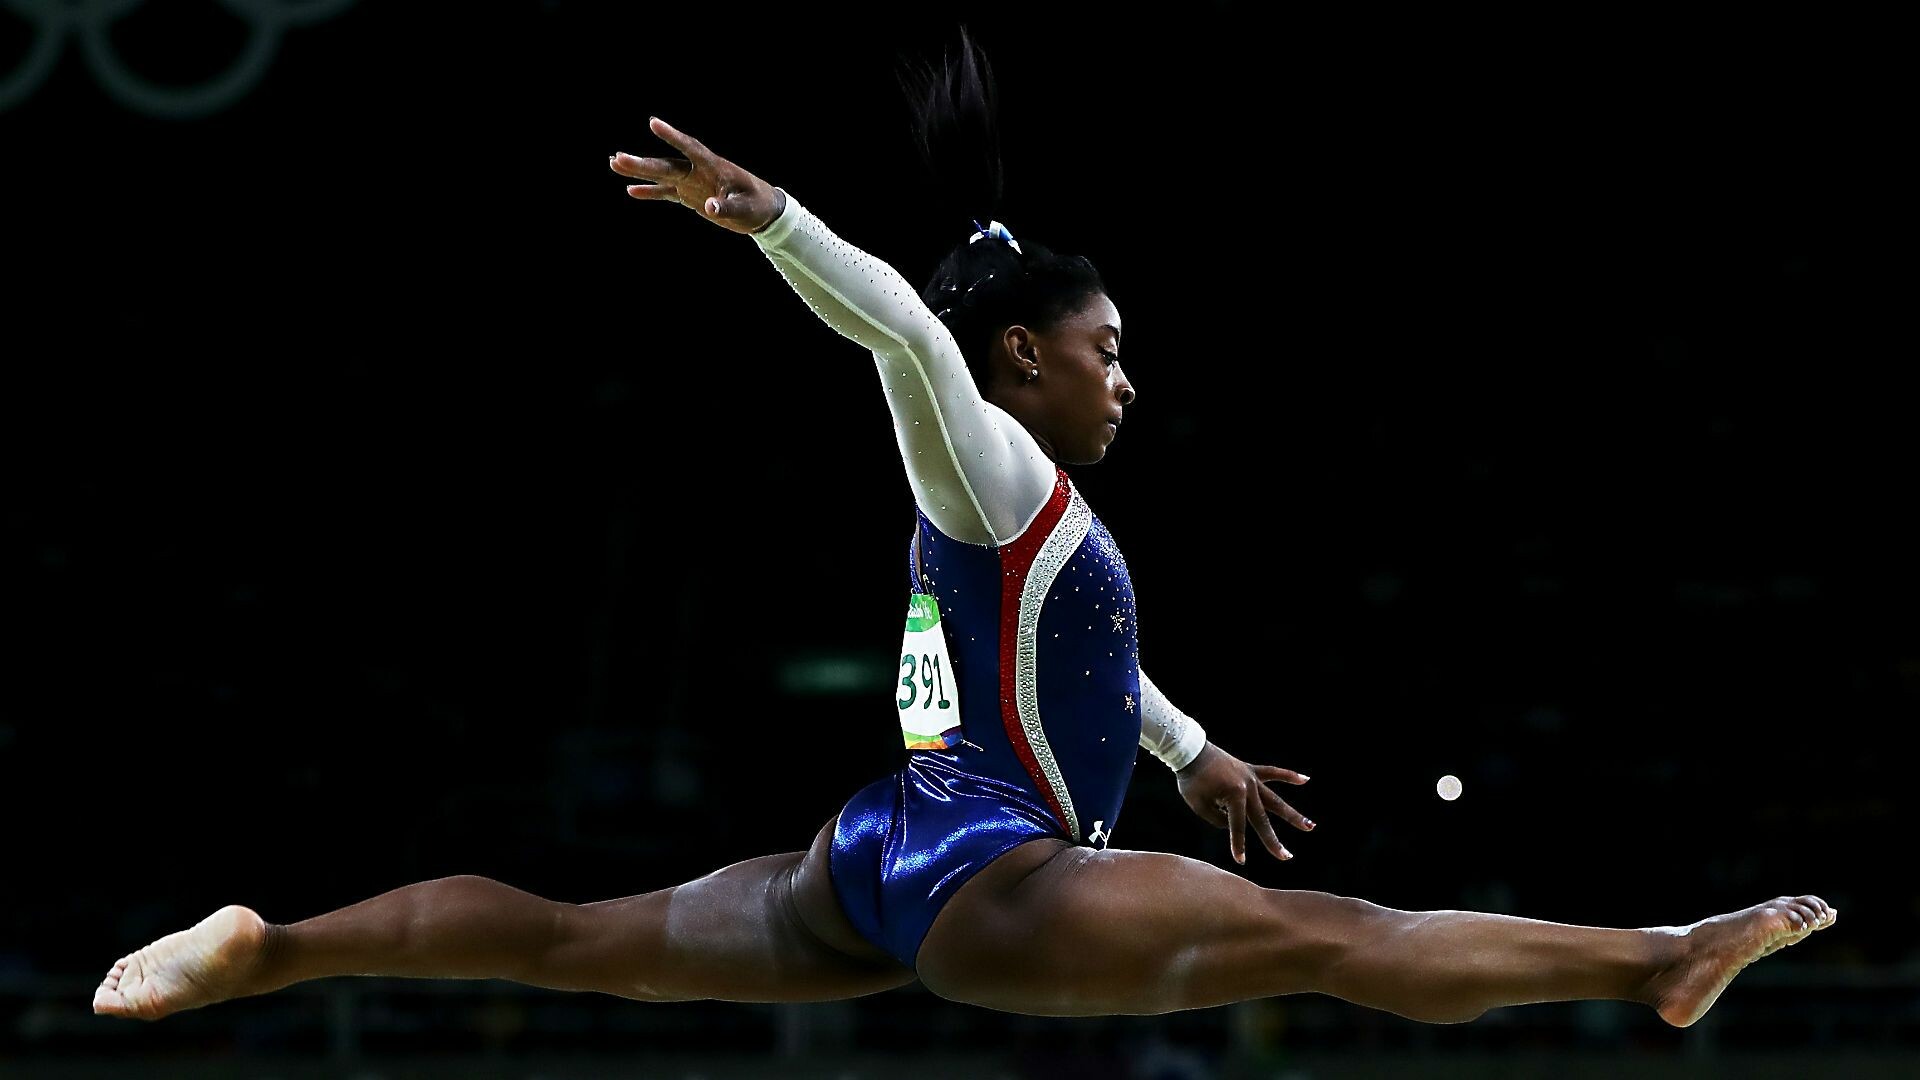 Simone Biles: The fourth female gymnast to win every major all-around title in an Olympic cycle. 1920x1080 Full HD Wallpaper.